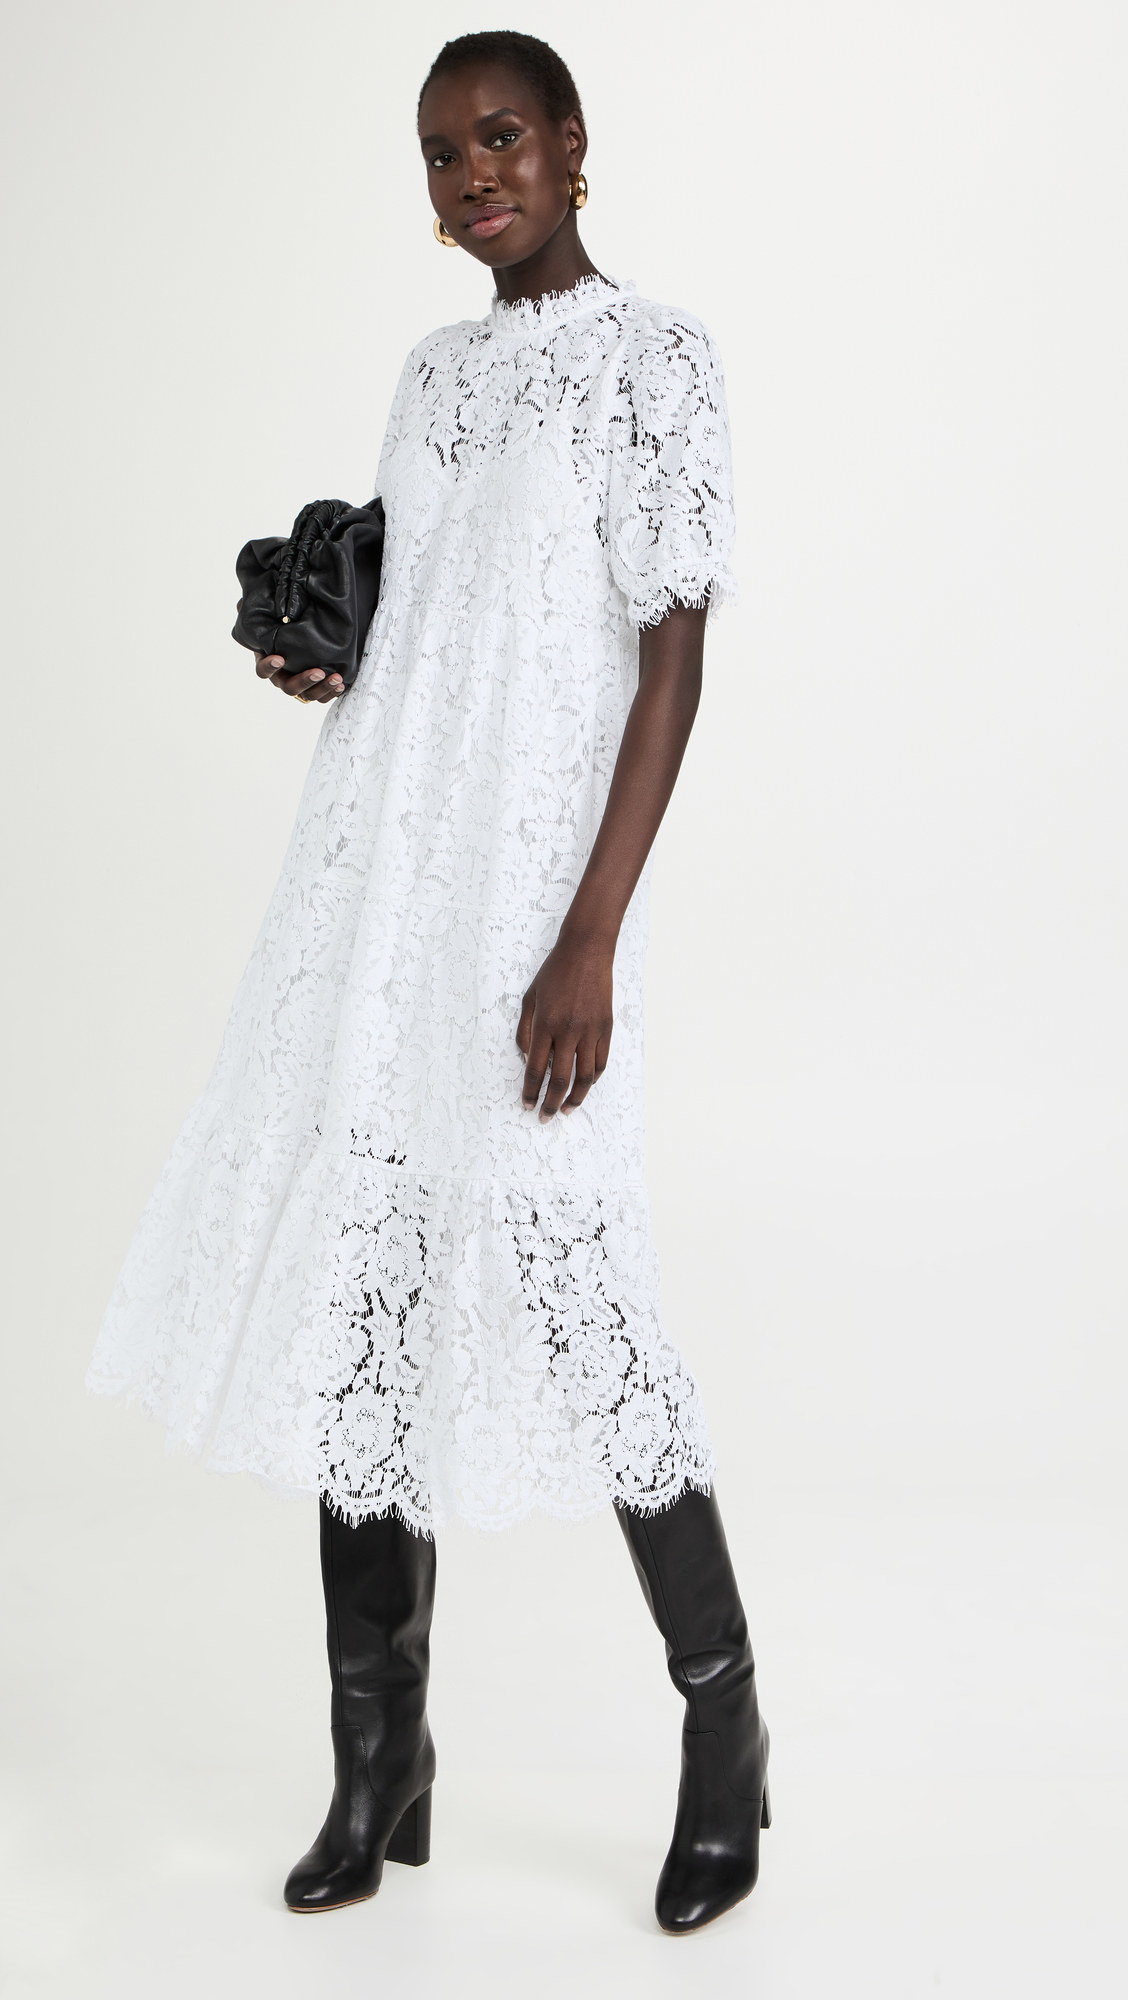 A model wearing the white lace dress with black boots and a black bag